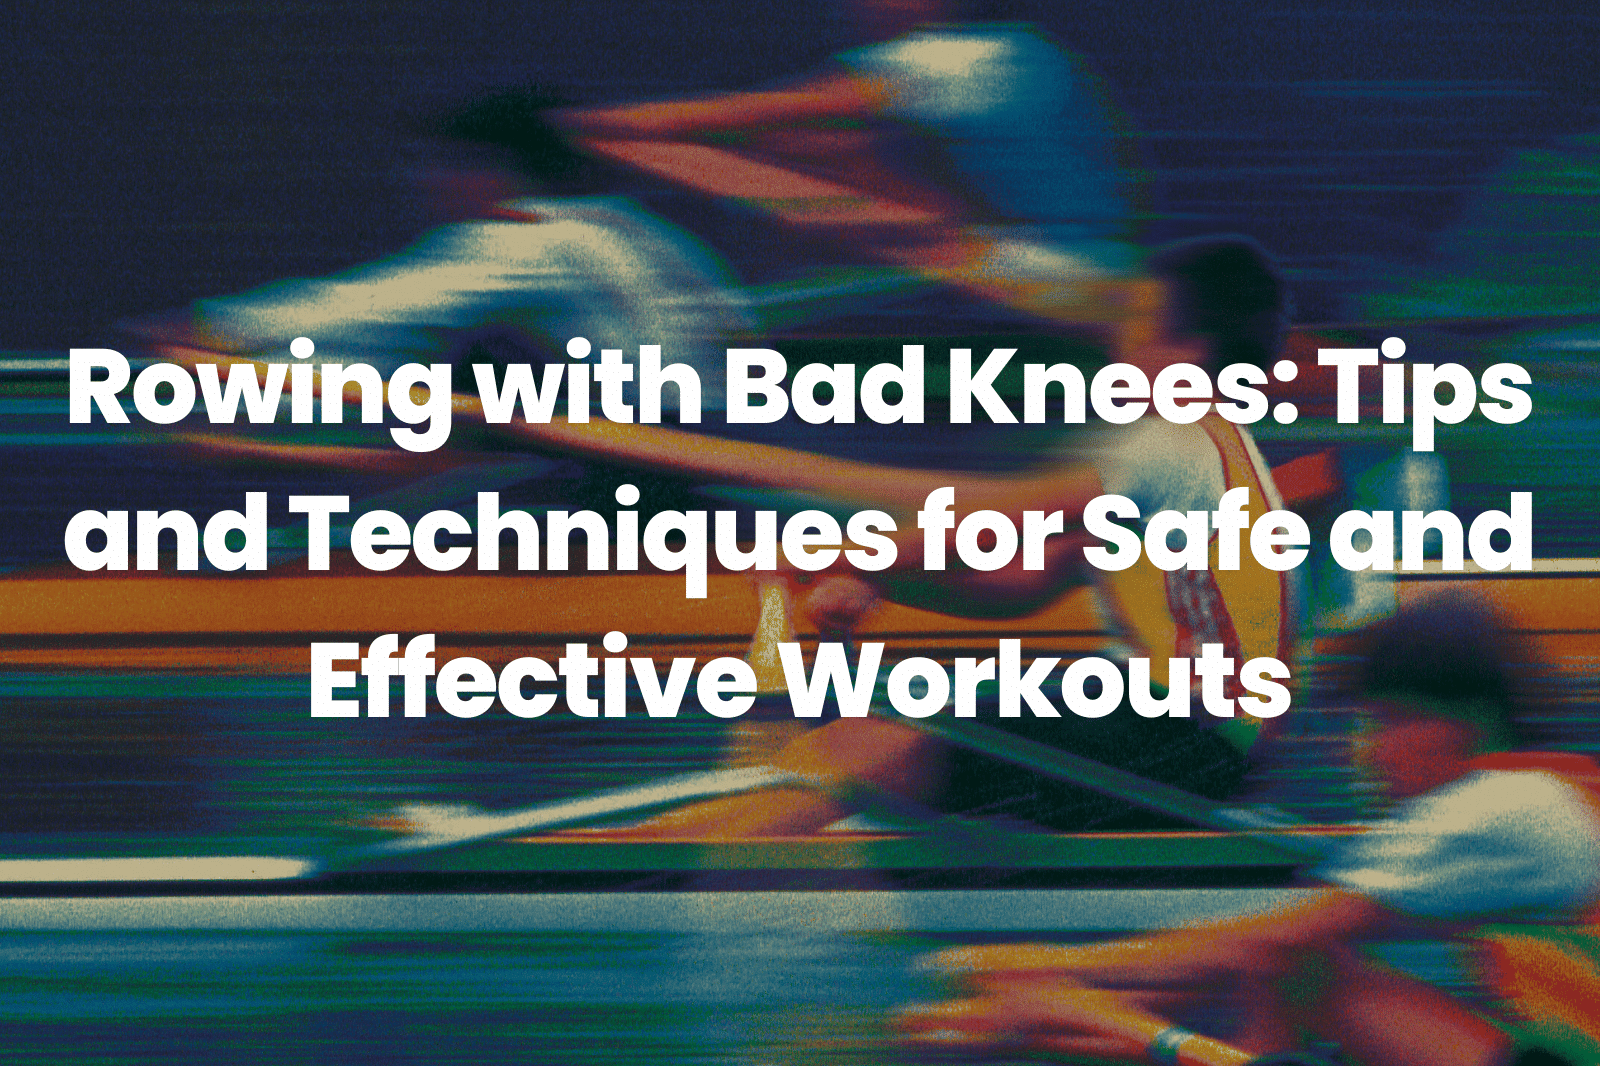 Rowing with Bad Knees